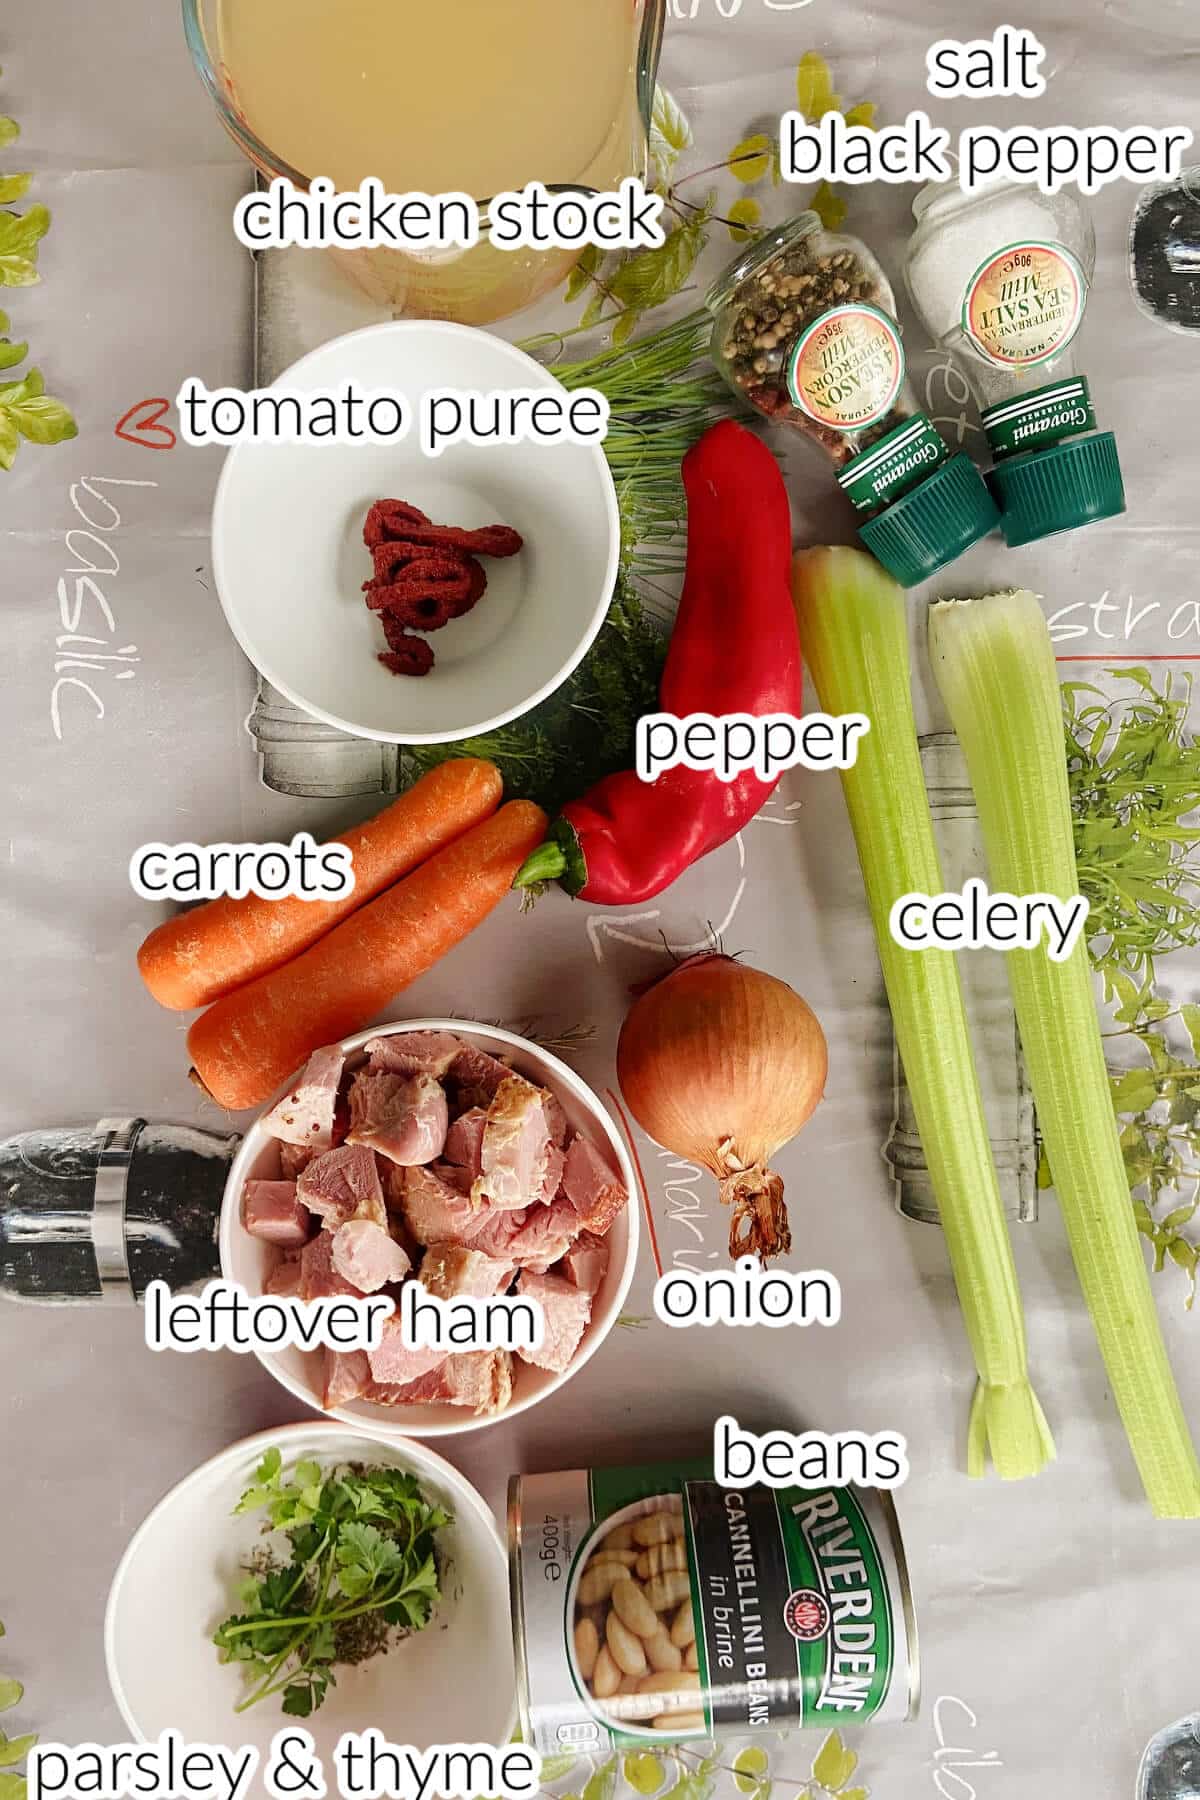 Ingredients needed to make leftover ham and bean soup.